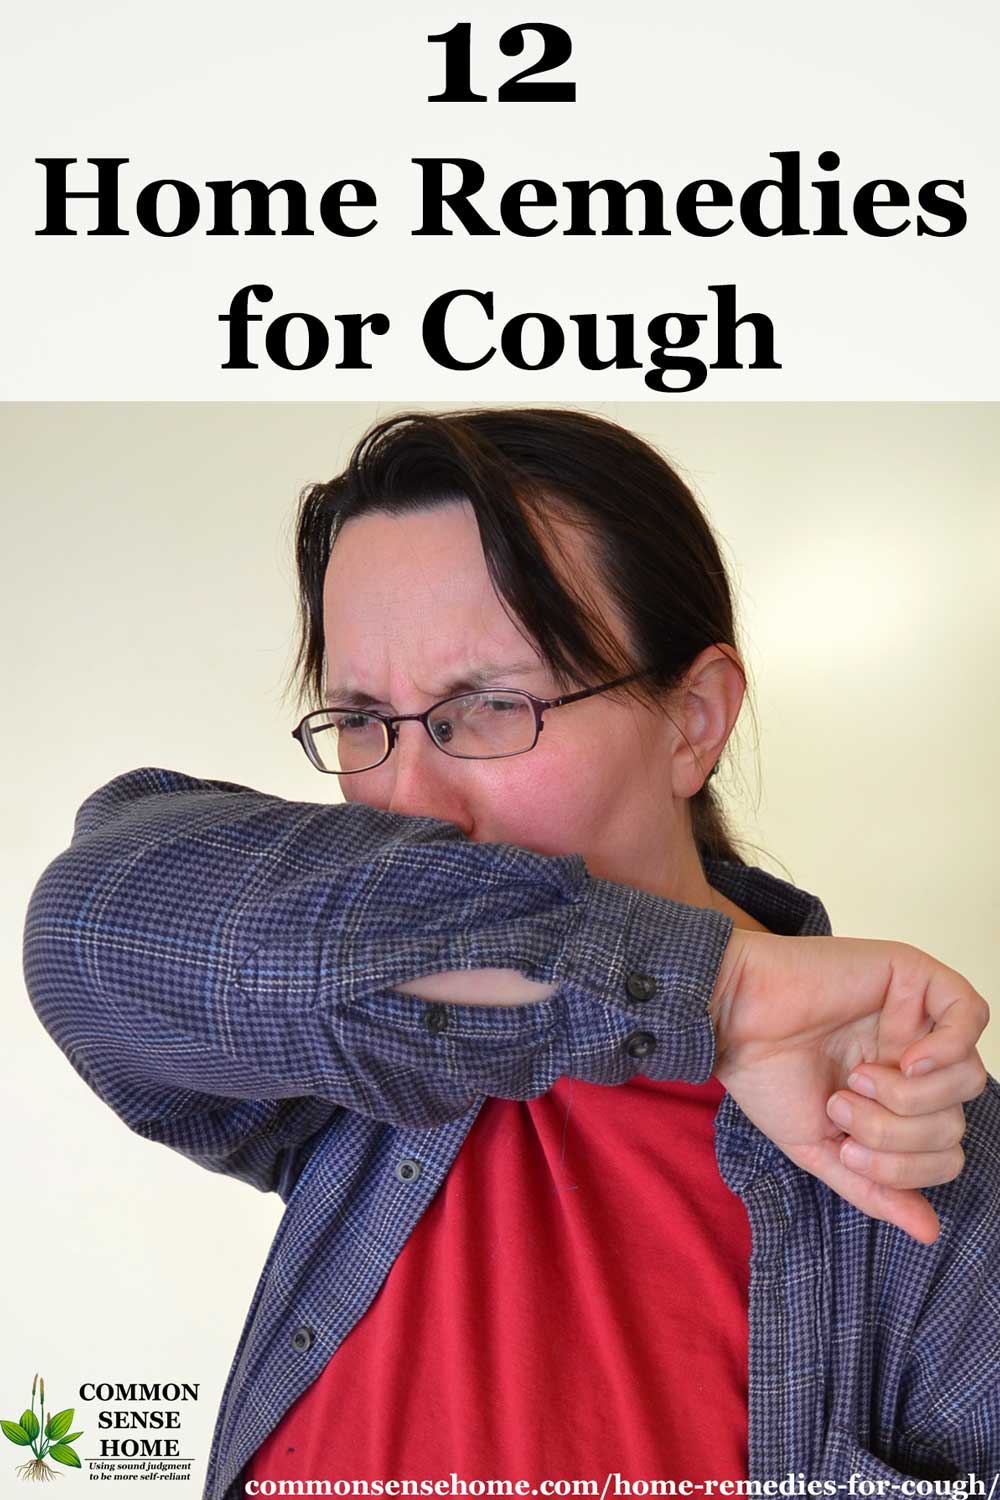 12 Home Remedies for Cough